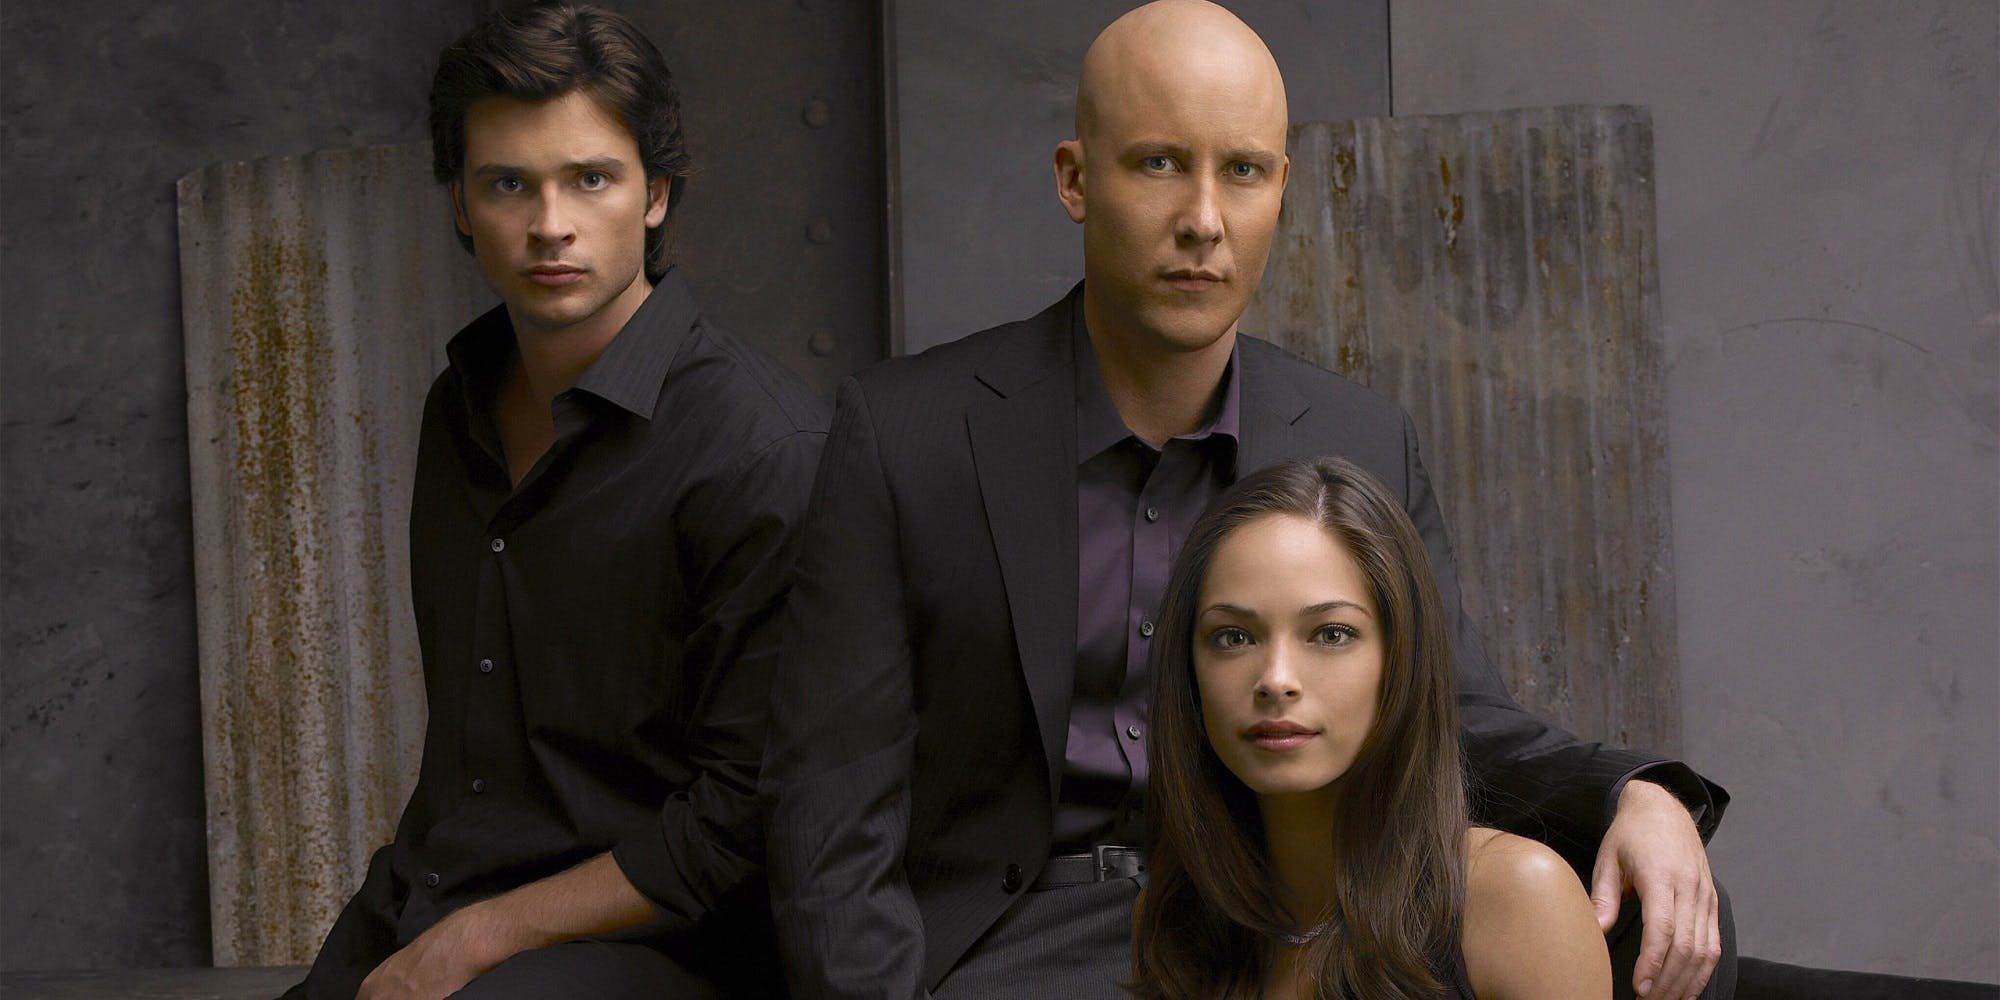 Lex Luthor and other characters in Smallville